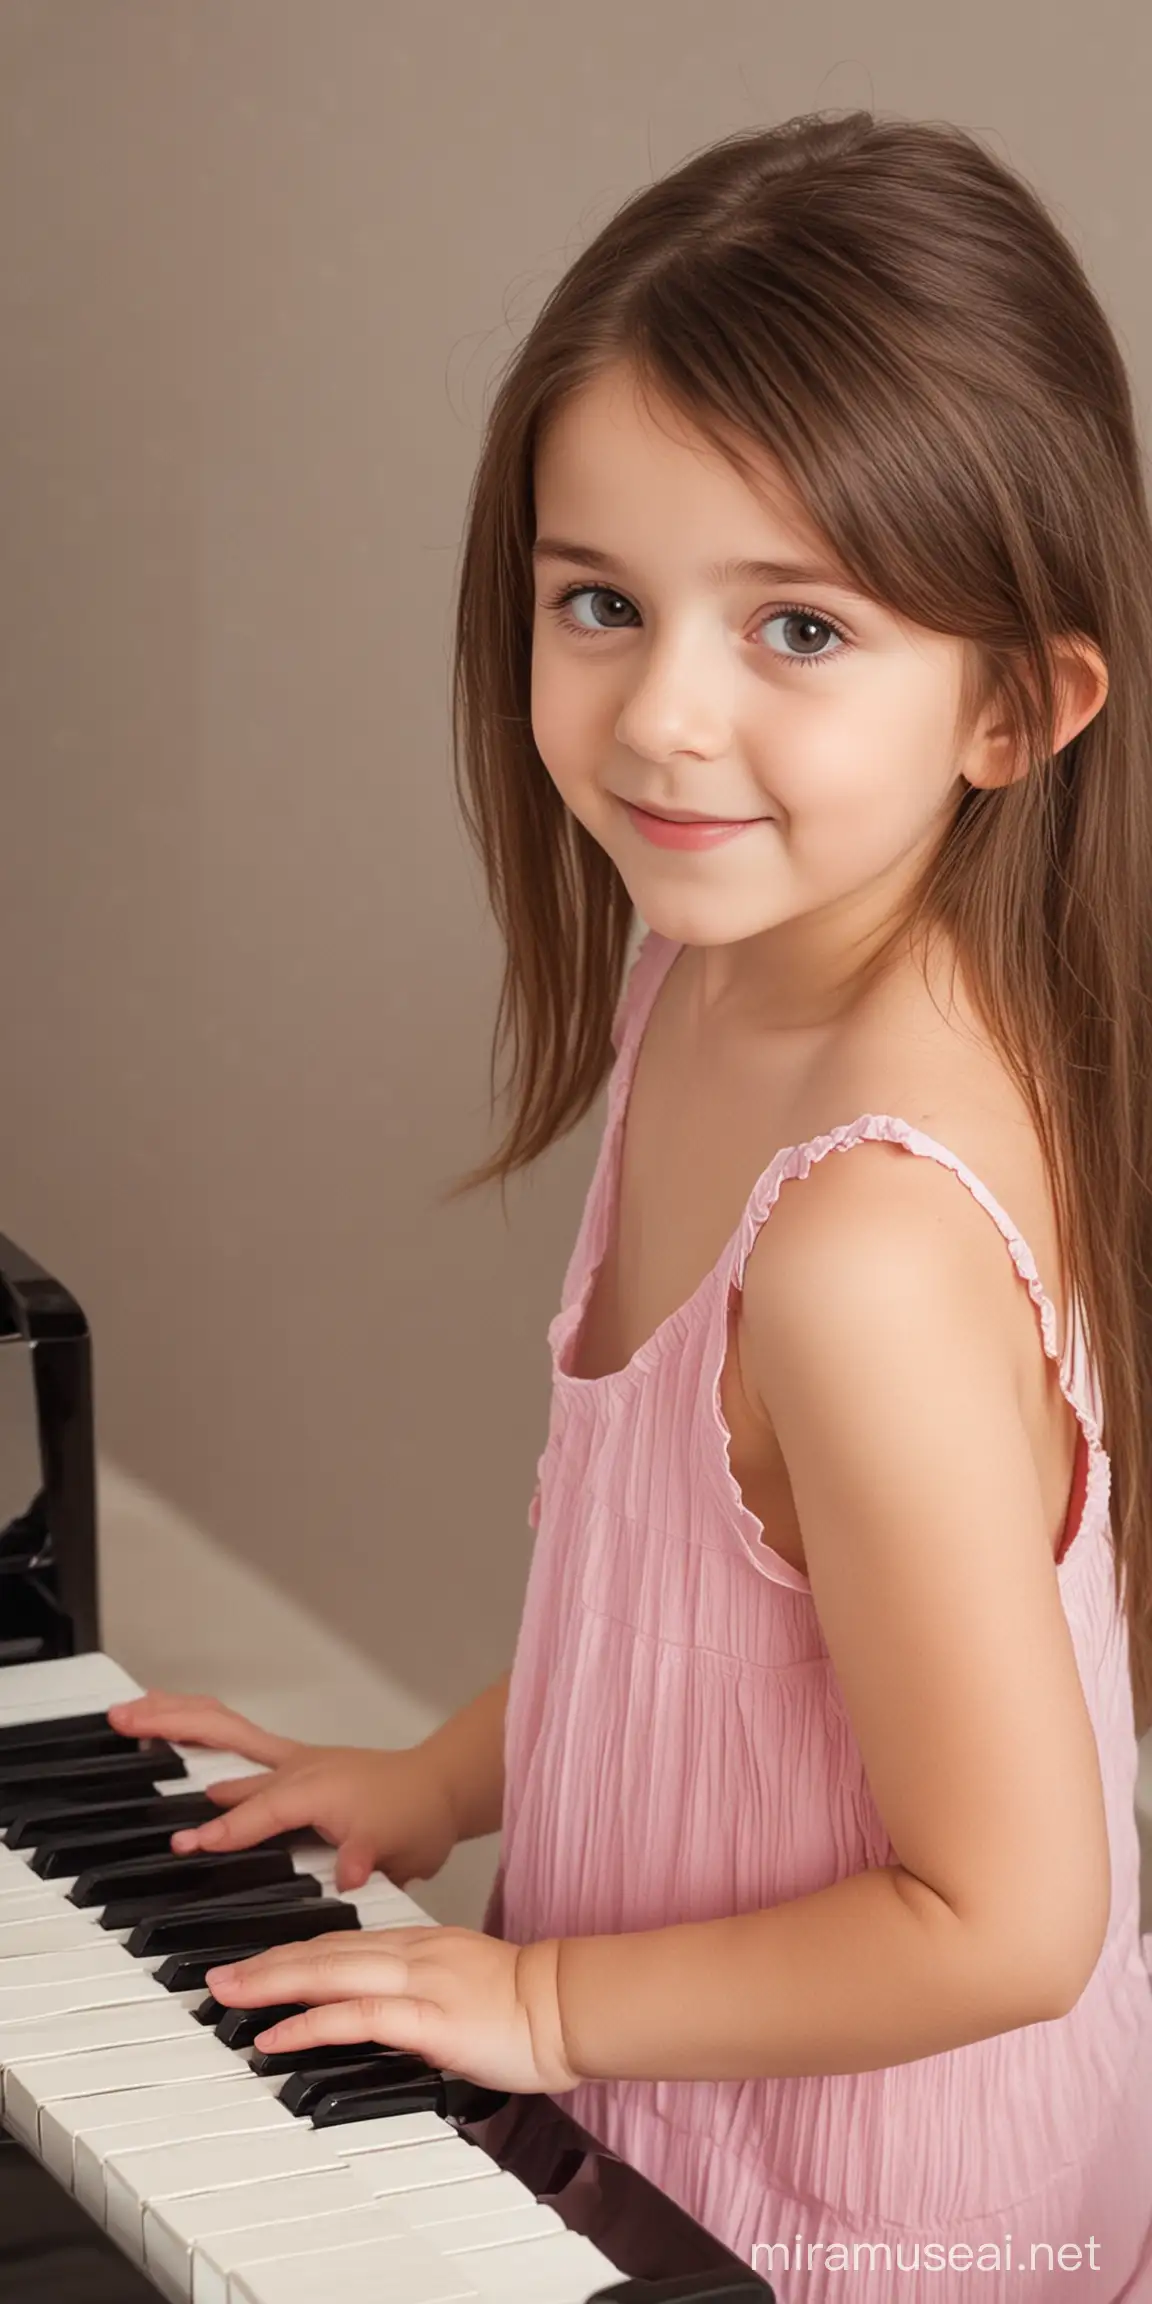 Engaging Piano Learning and Singing Session for Children